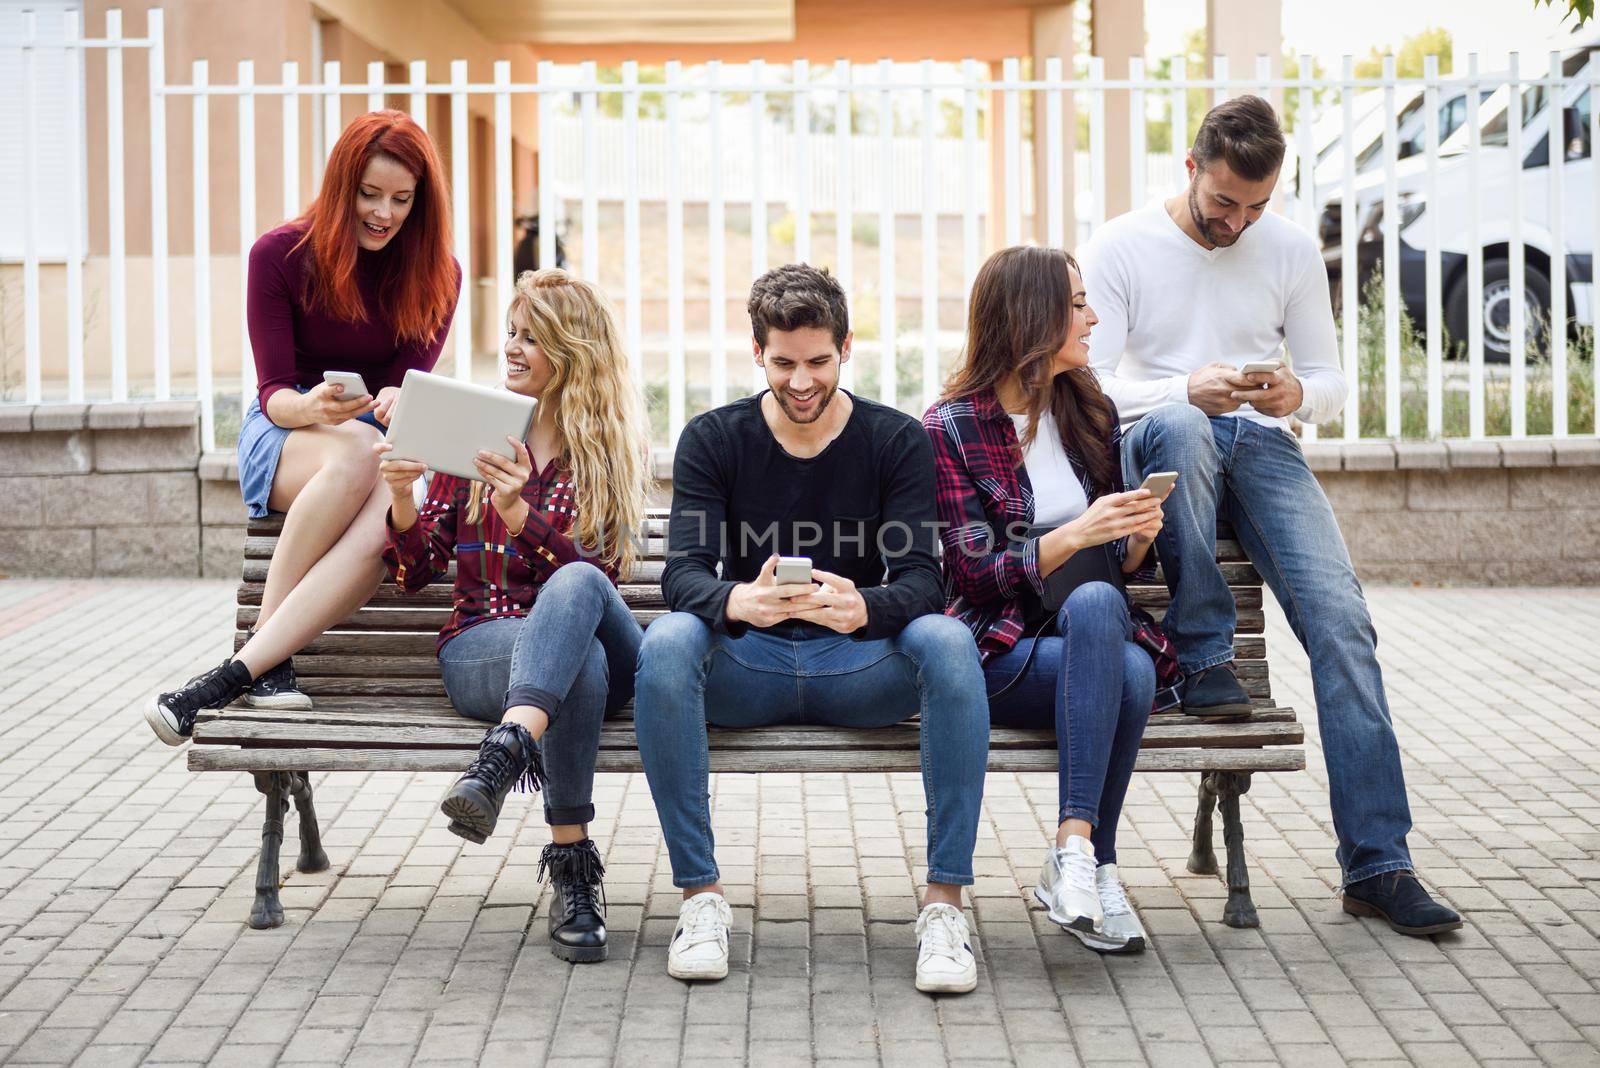 Group of young people using smartphone and tablet computers outdoors in urban background. Women and men sitting on a bench in the street wearing casual clothes.